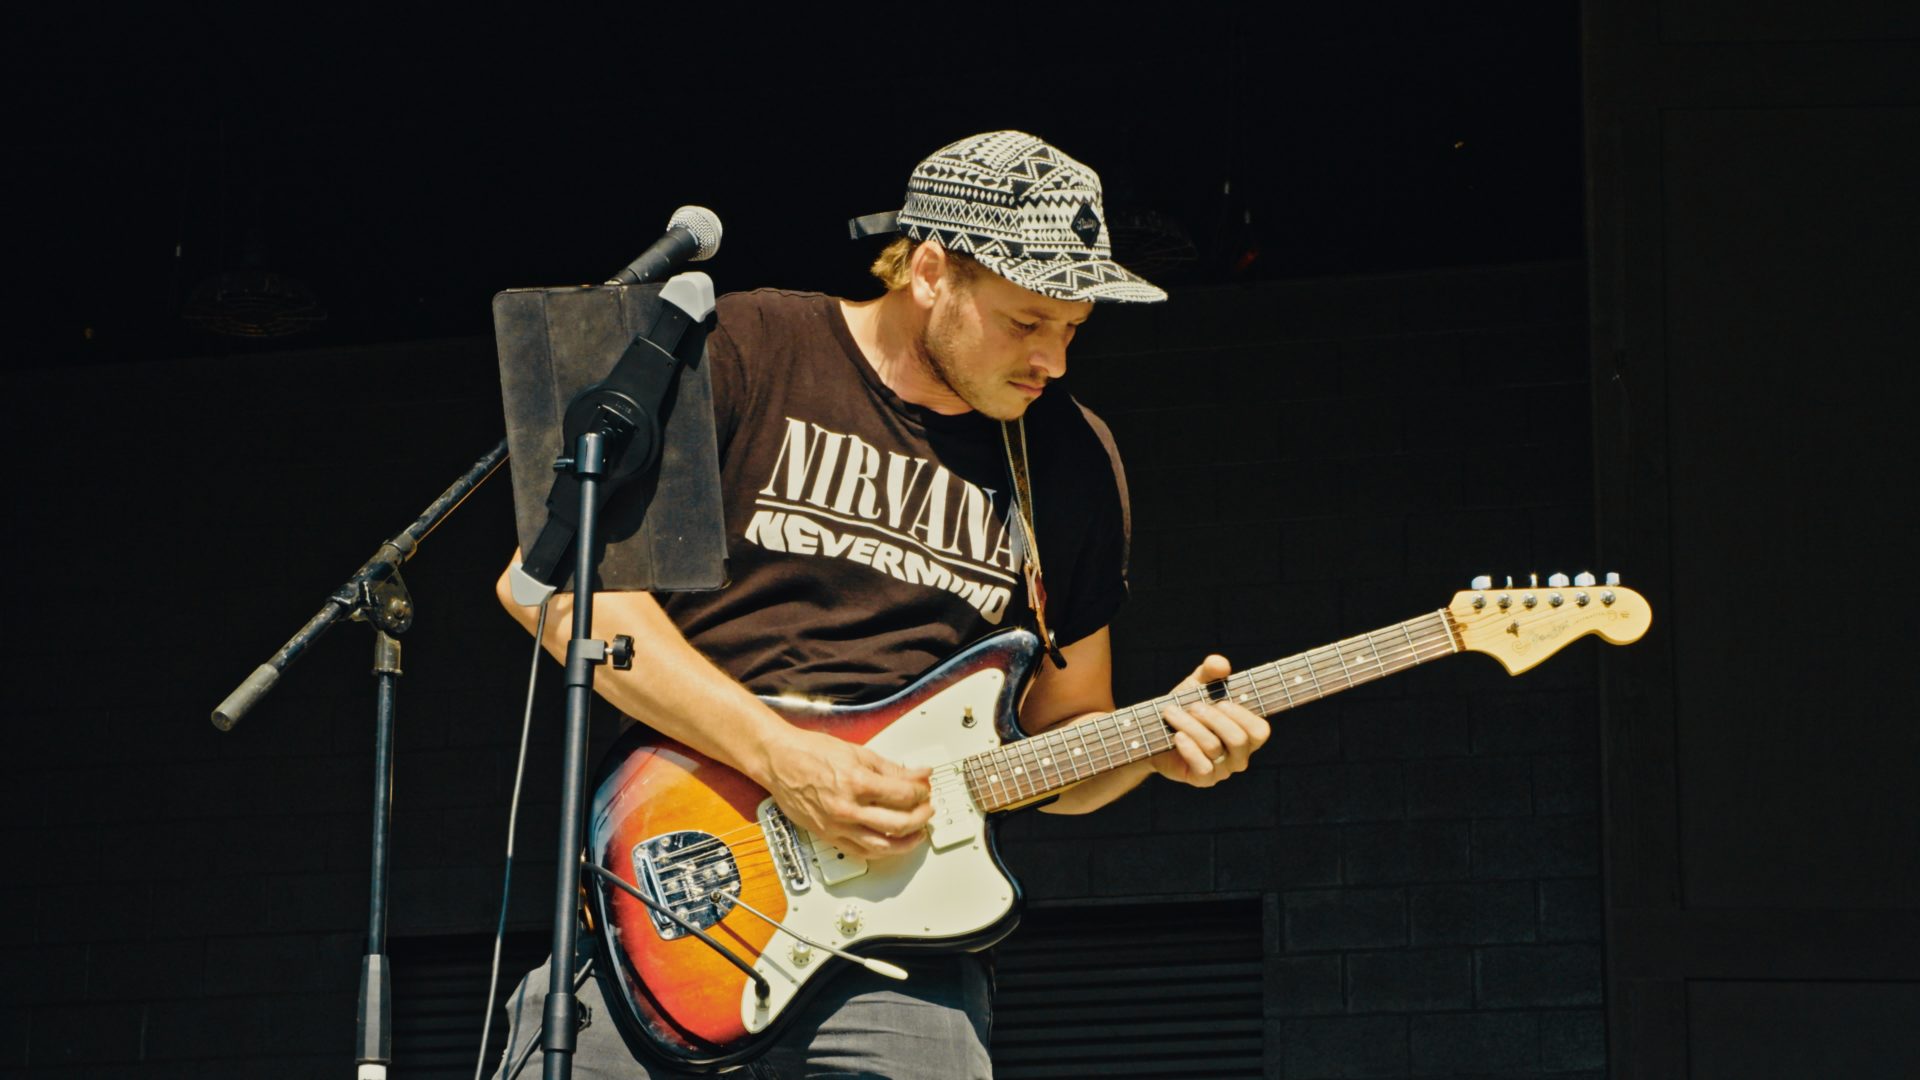 Event photography of a man in a black shirt playing guitar.